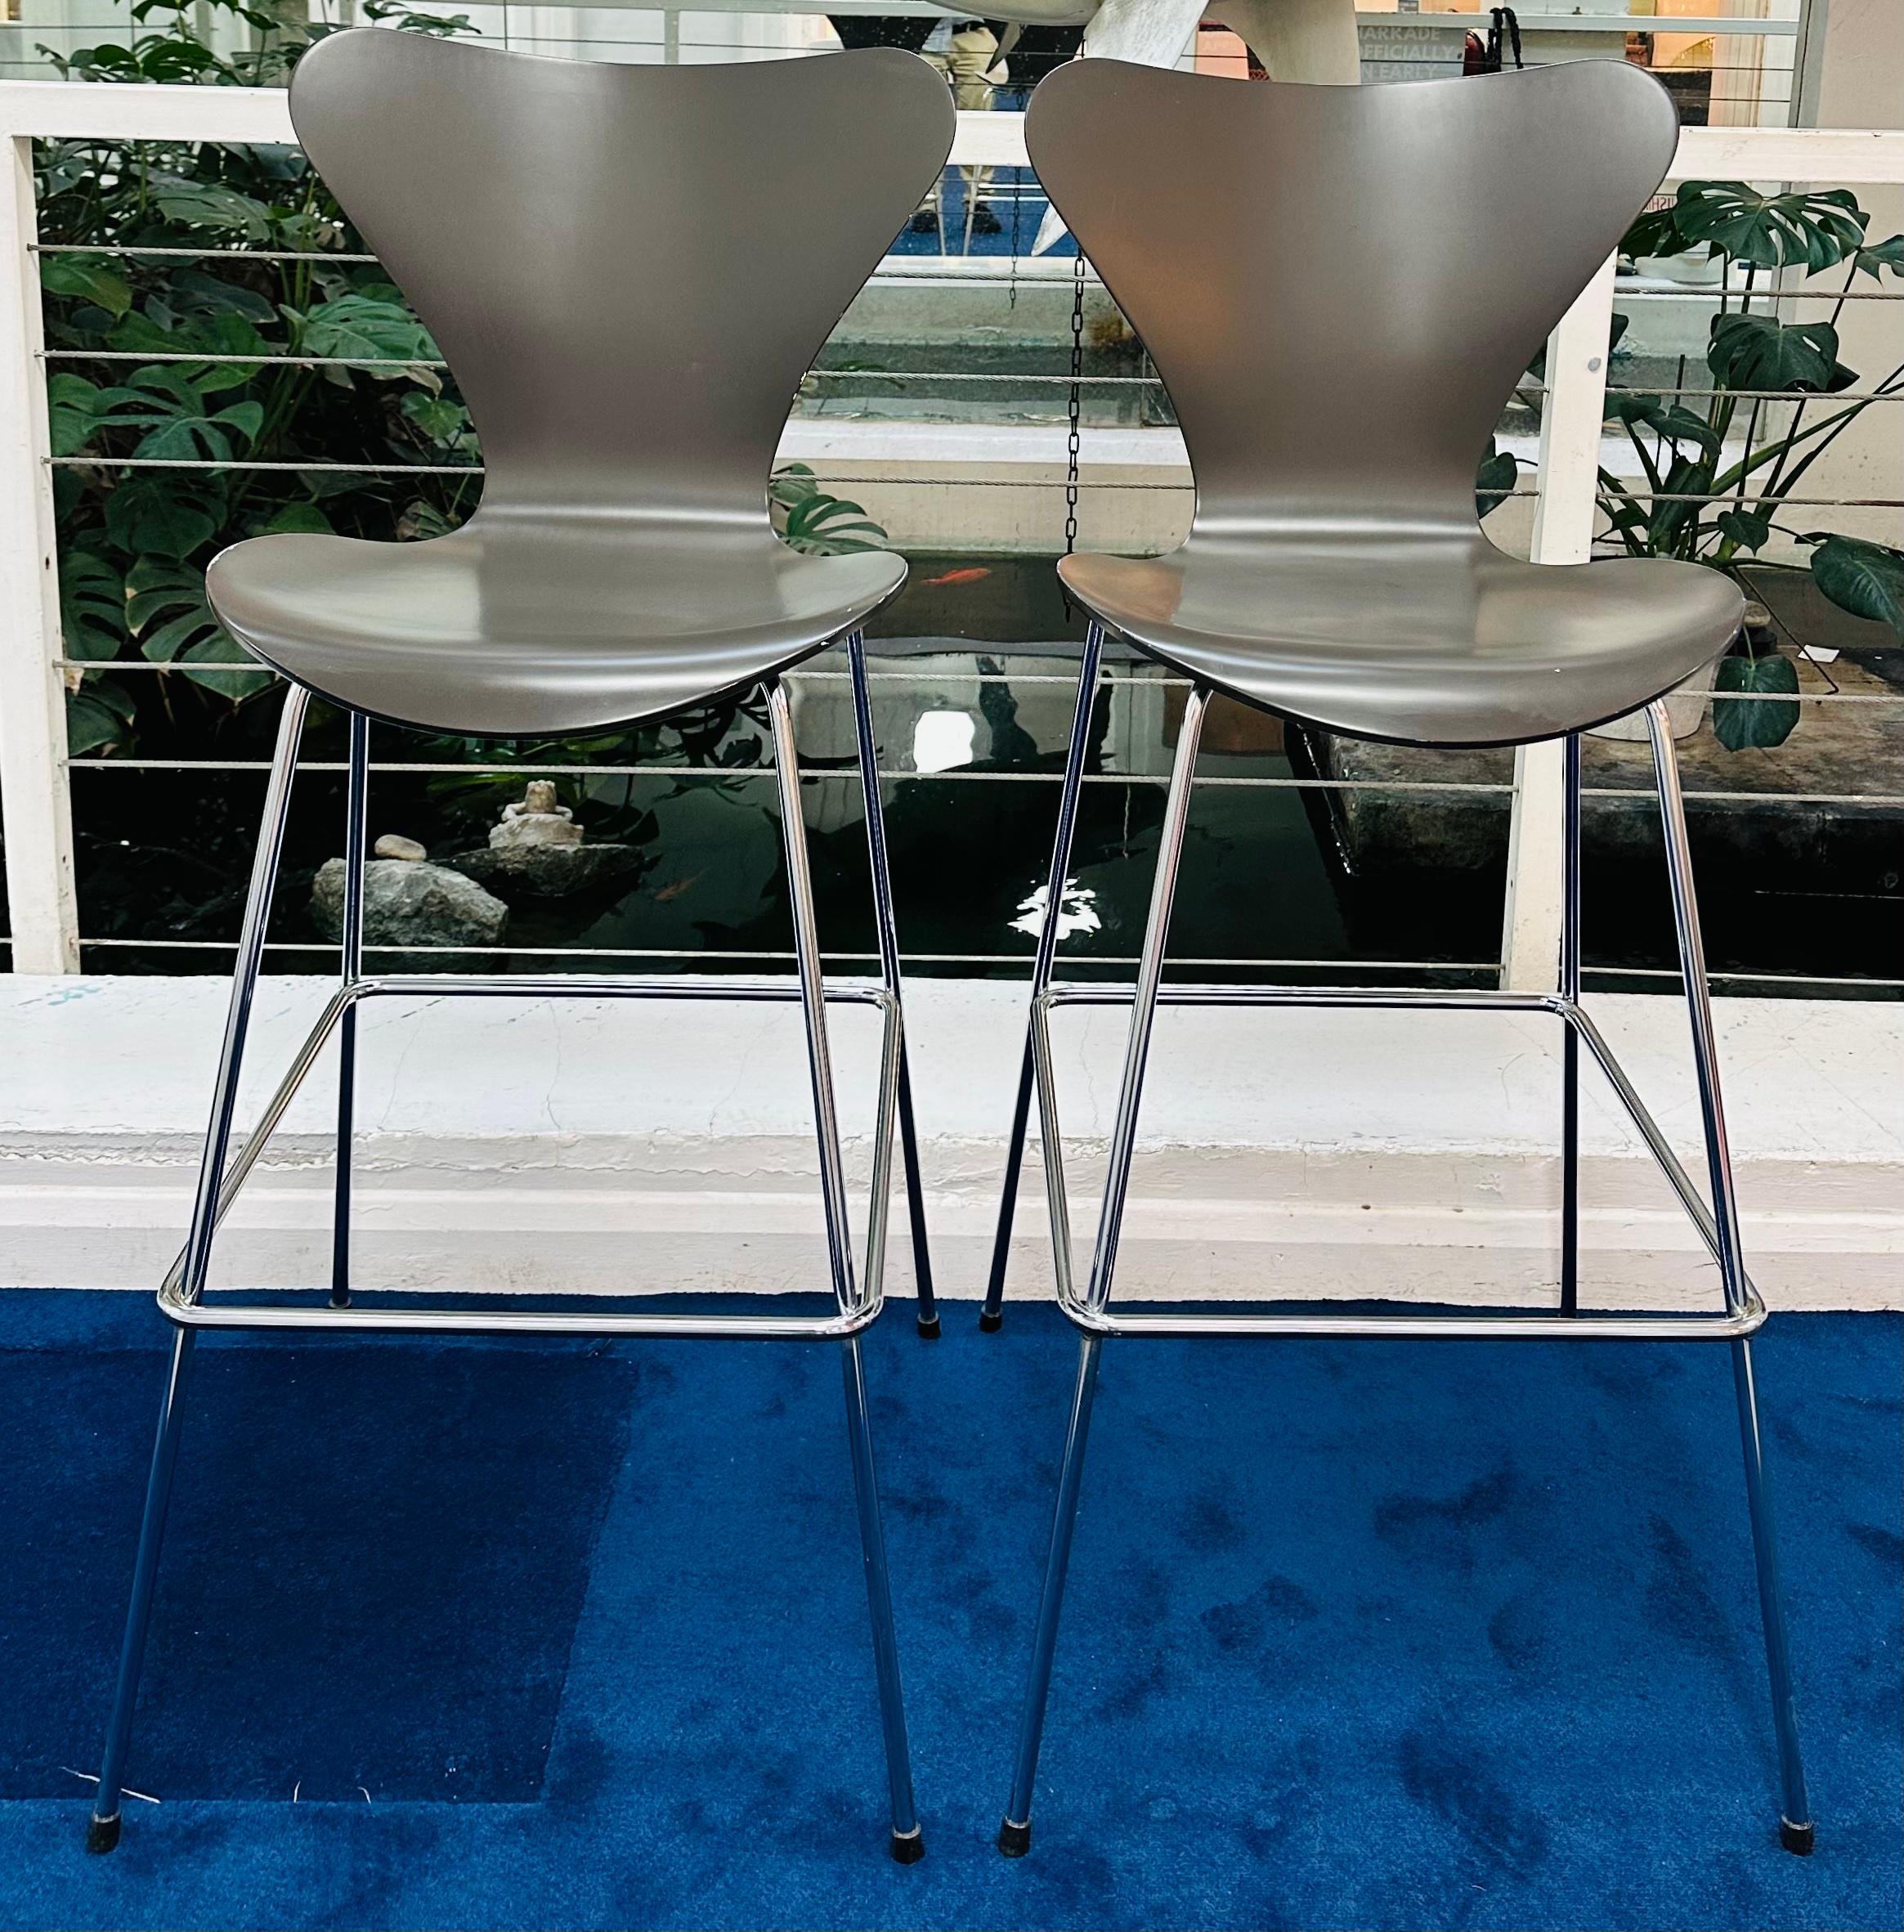 Pair of Fritz Hansen Series 7 Bar Stools designed by Arne Jacobsen in 1955.  Year of manufacture 2005.

The seat is made from curved ash with a dark grey lacquered finish with chromed steel legs.  

In good vintage condition with some chips and